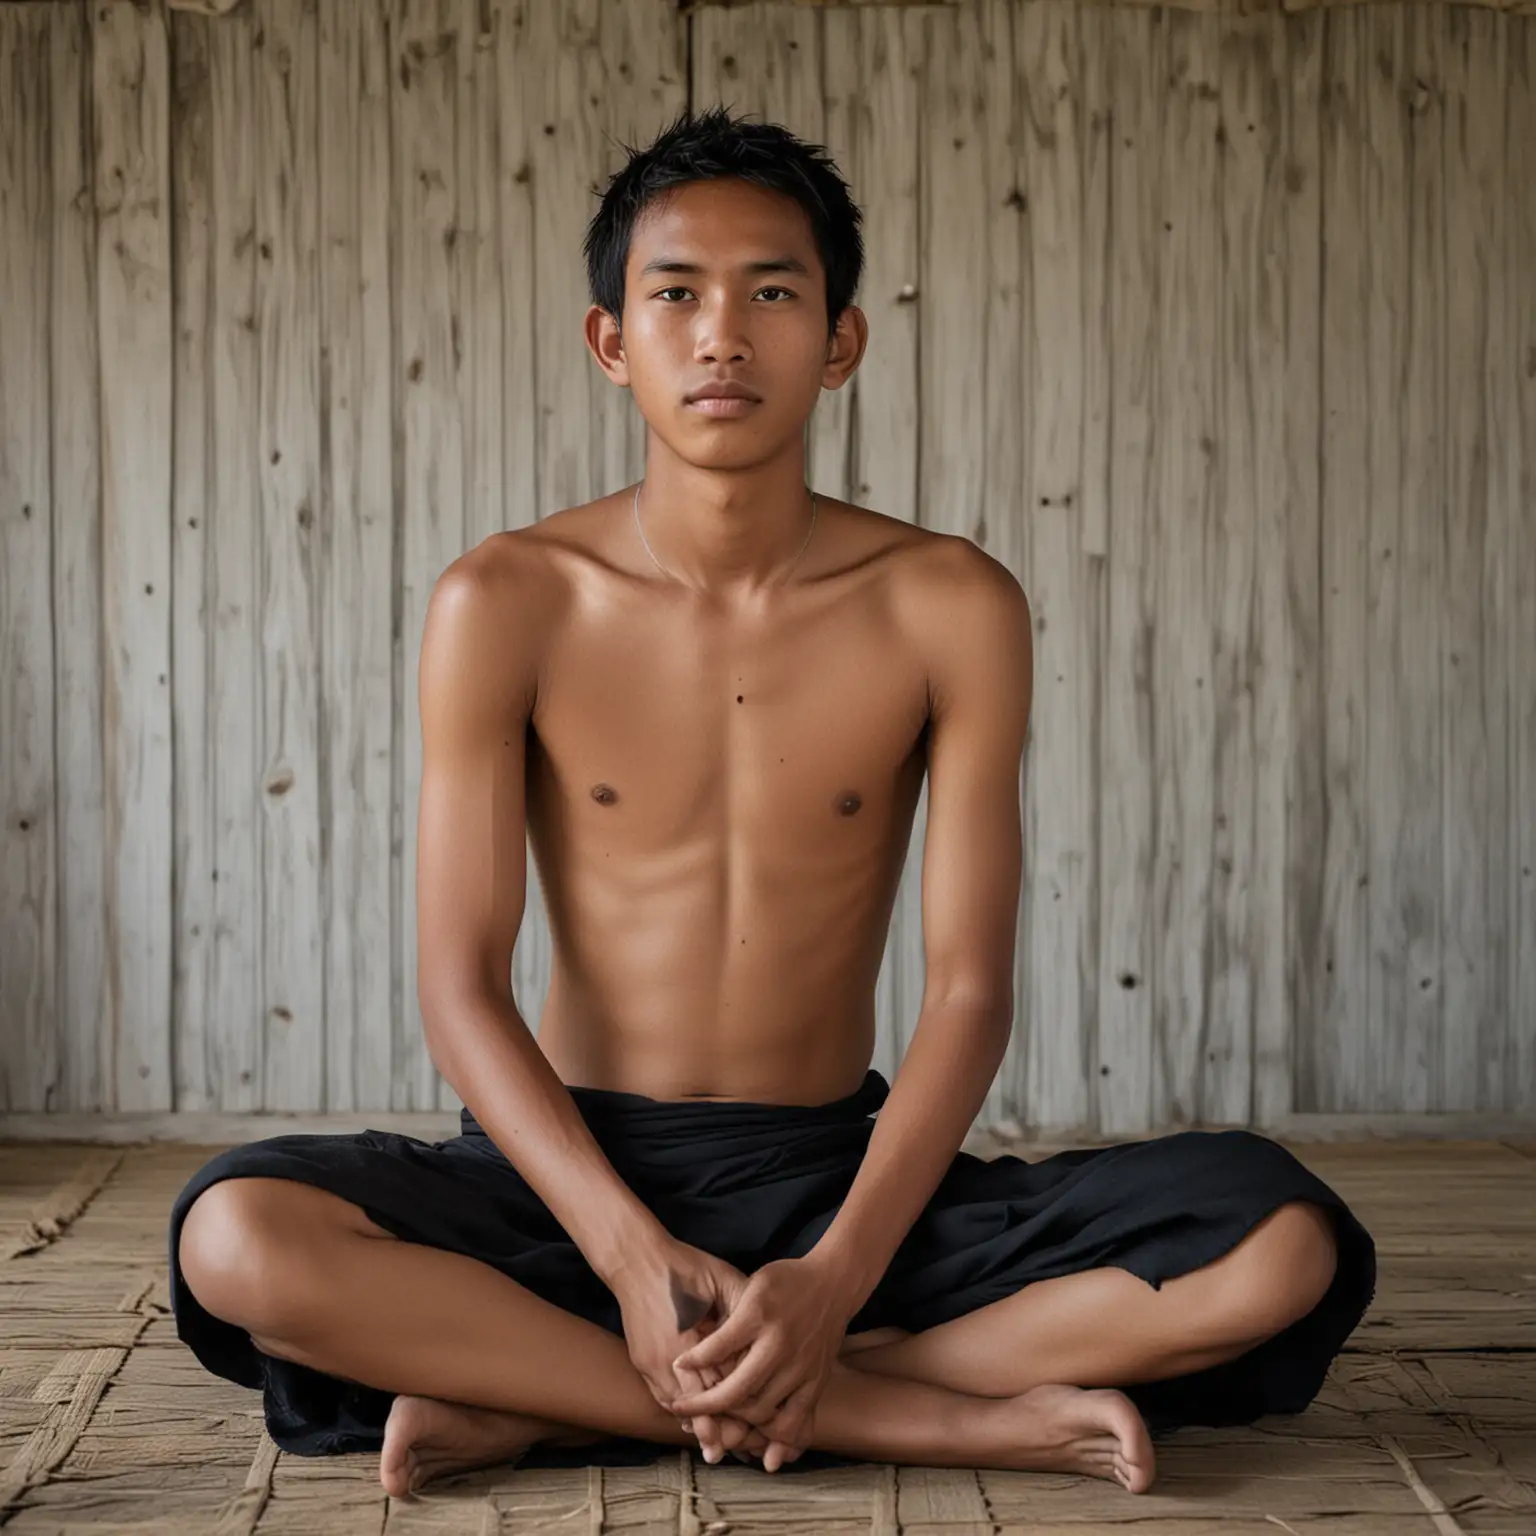 15 year old Indonesian man bare chested sitting cross-legged wearing a long black cloth without a pattern, white skin,  in a traditional wooden house